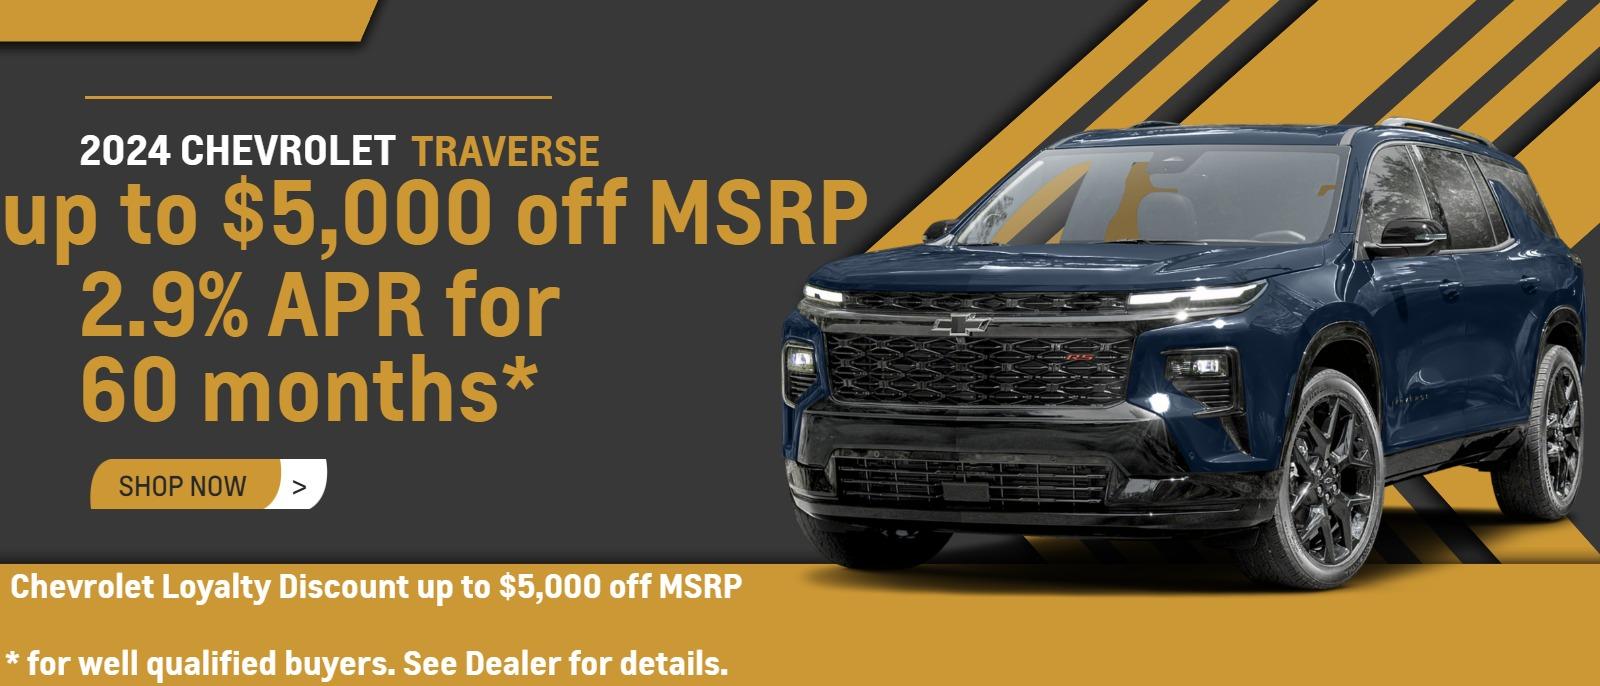 2024 Traverse up to $5,000 off MSRP 2.9% APR for 60 months for well qualified buyers